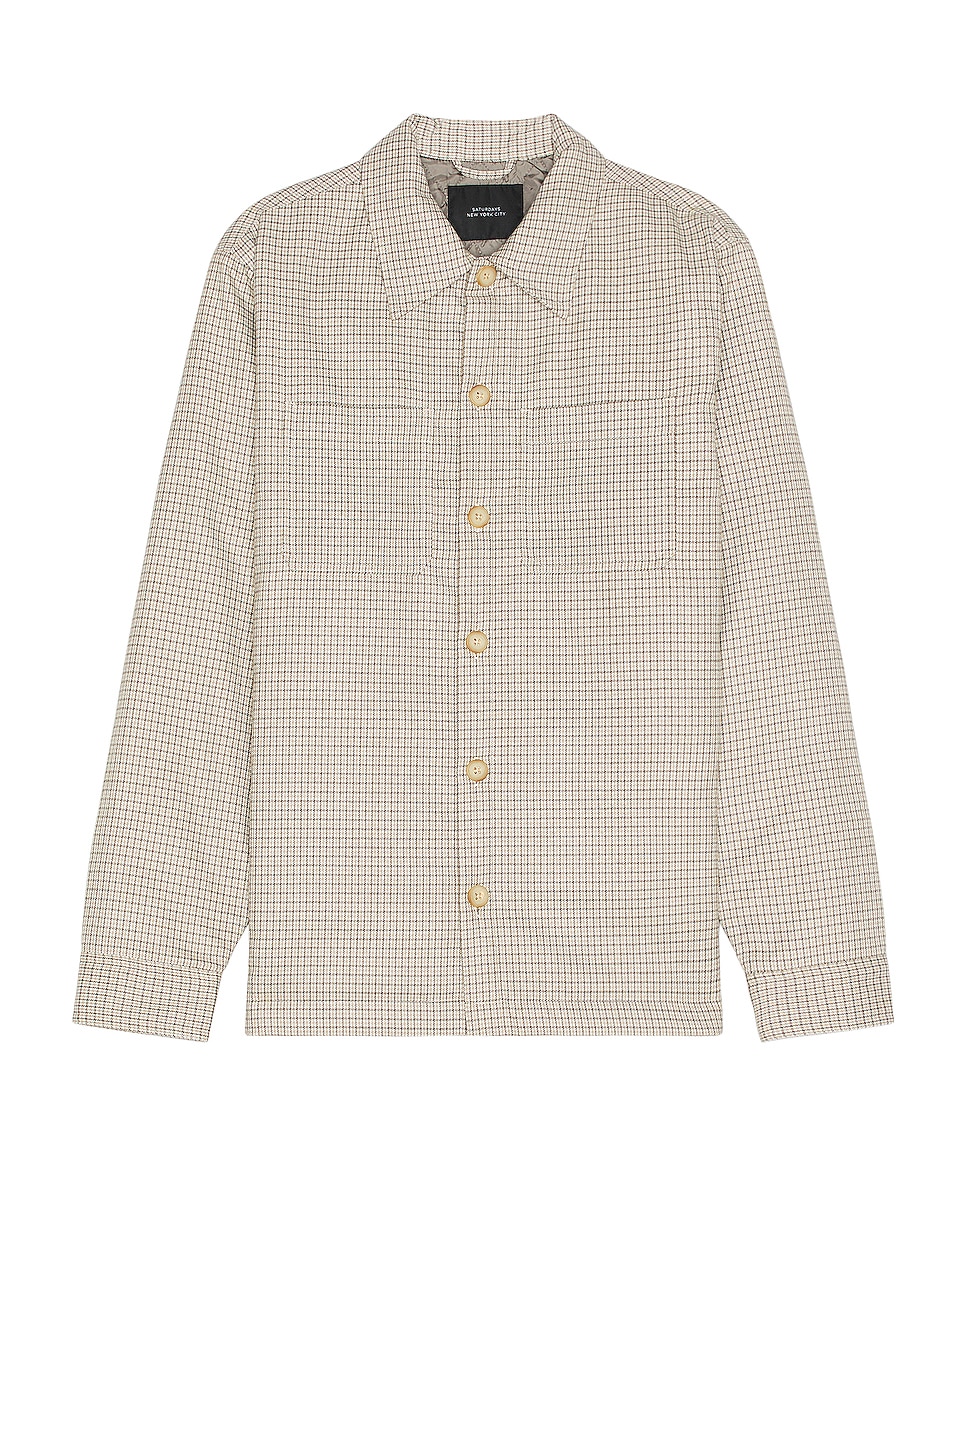 Image 1 of SATURDAYS NYC Rhodes Padded Overshirt in Bungee